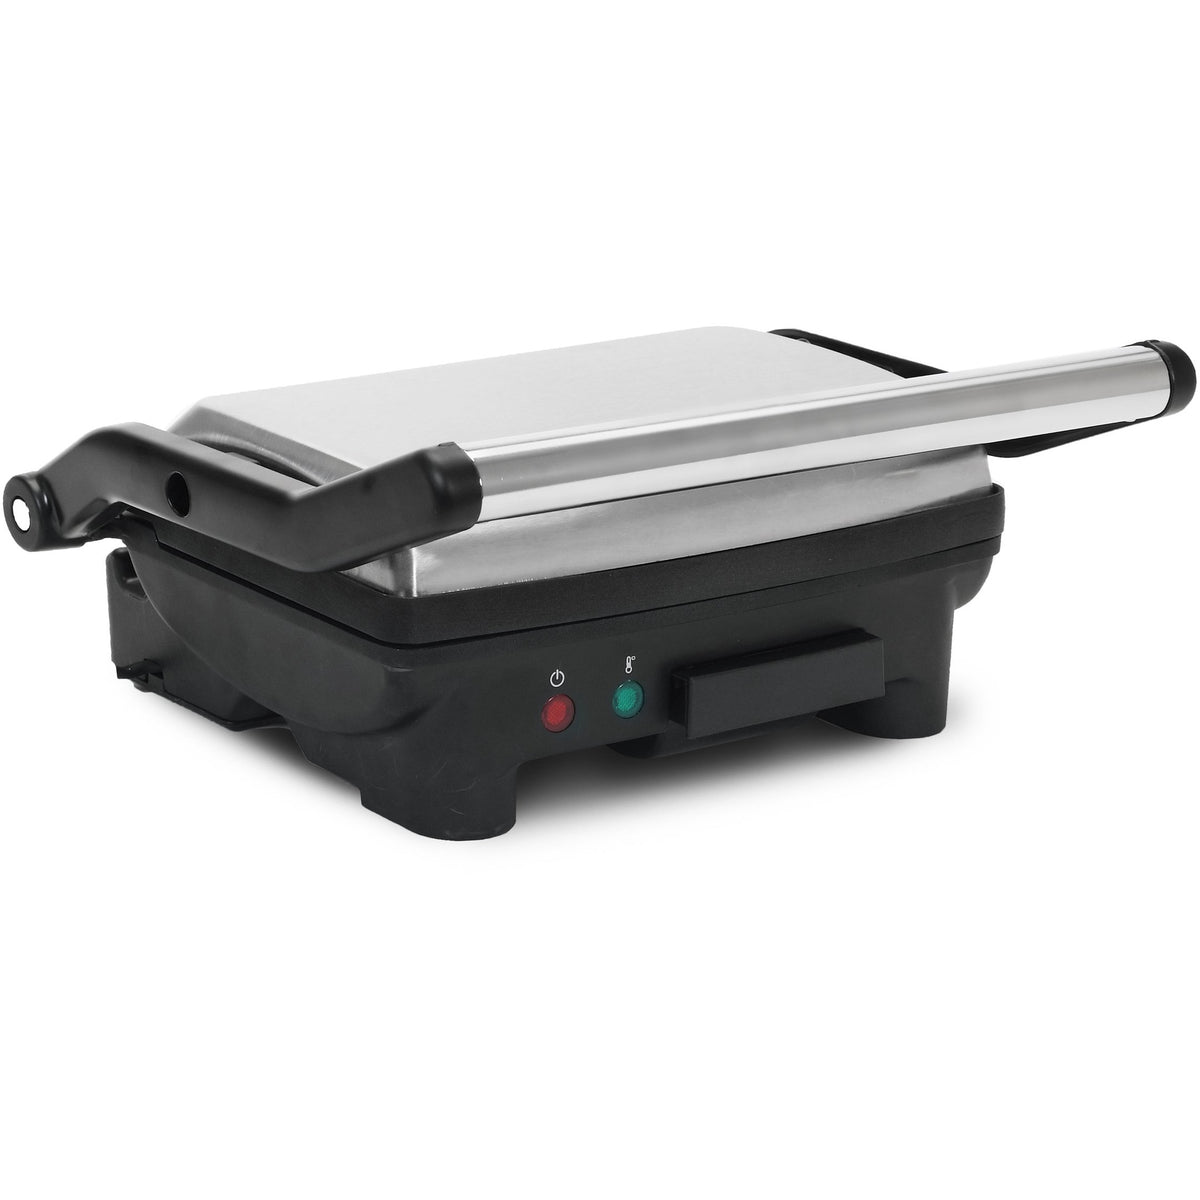 Elite Gourmet Electric Griddle 10.5 x 8.5 Personal grill skillet panini  range